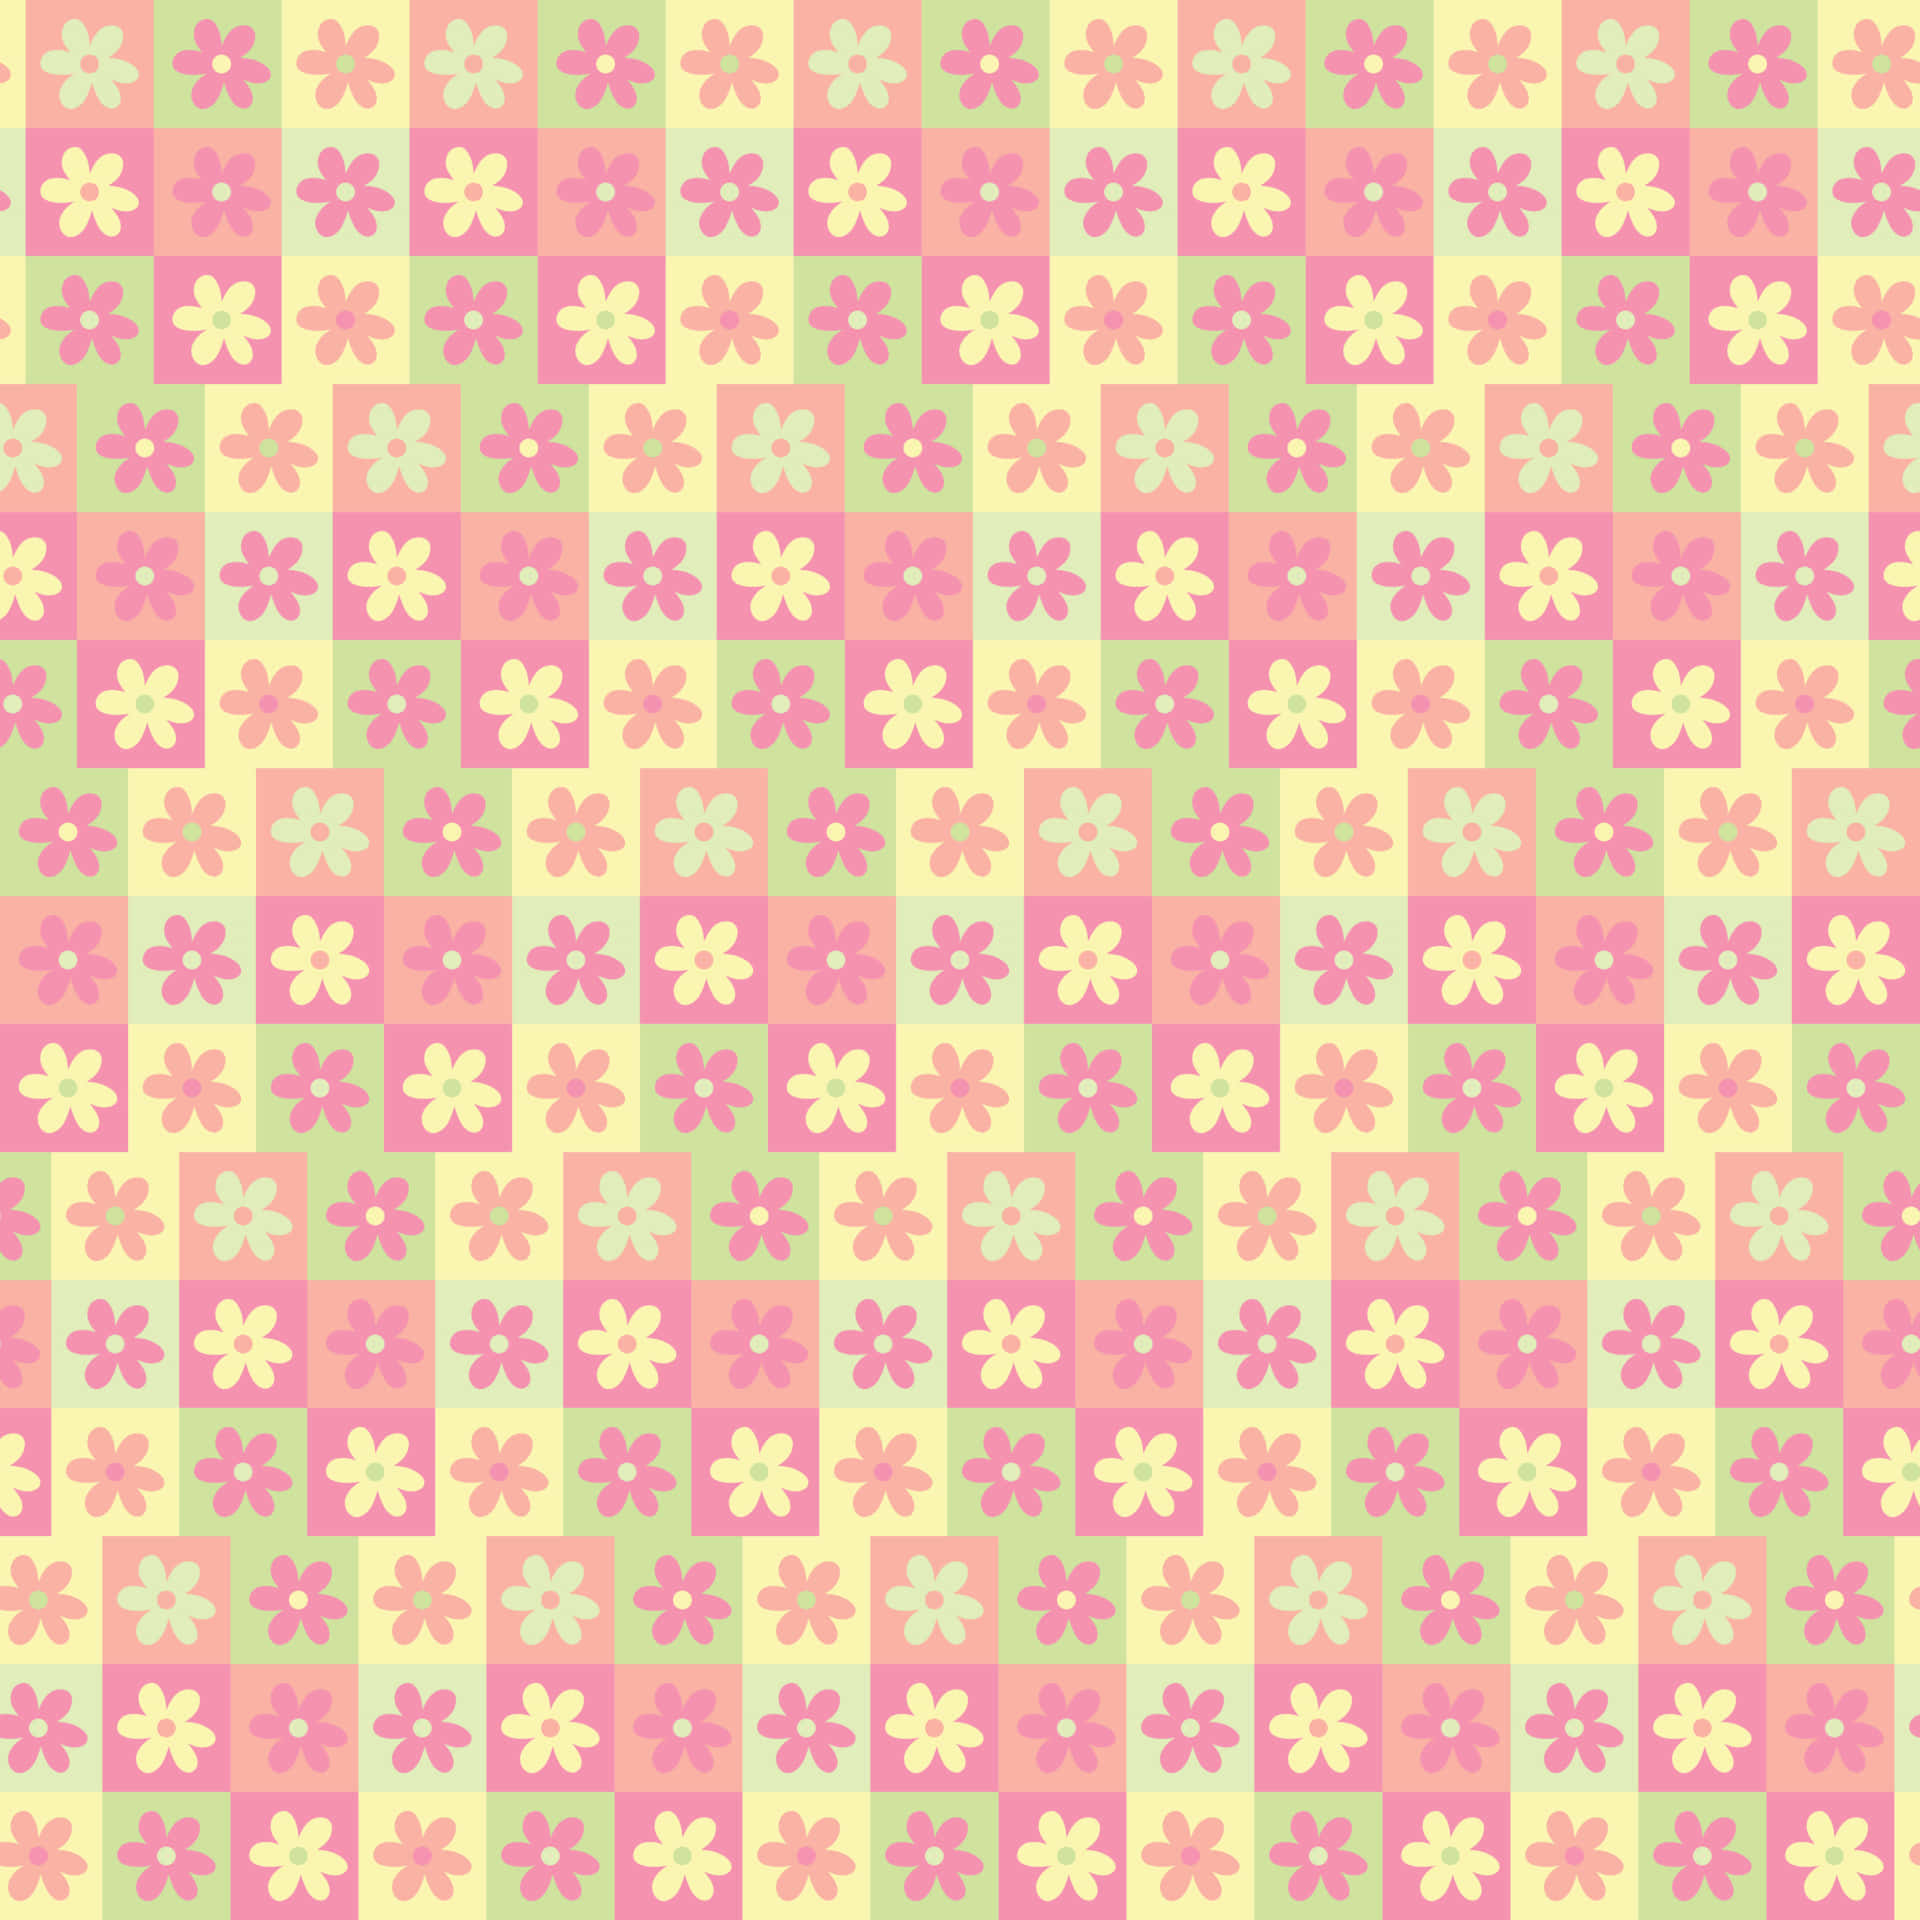 Have fun with your own Kawaii Pastel Laptop! Wallpaper